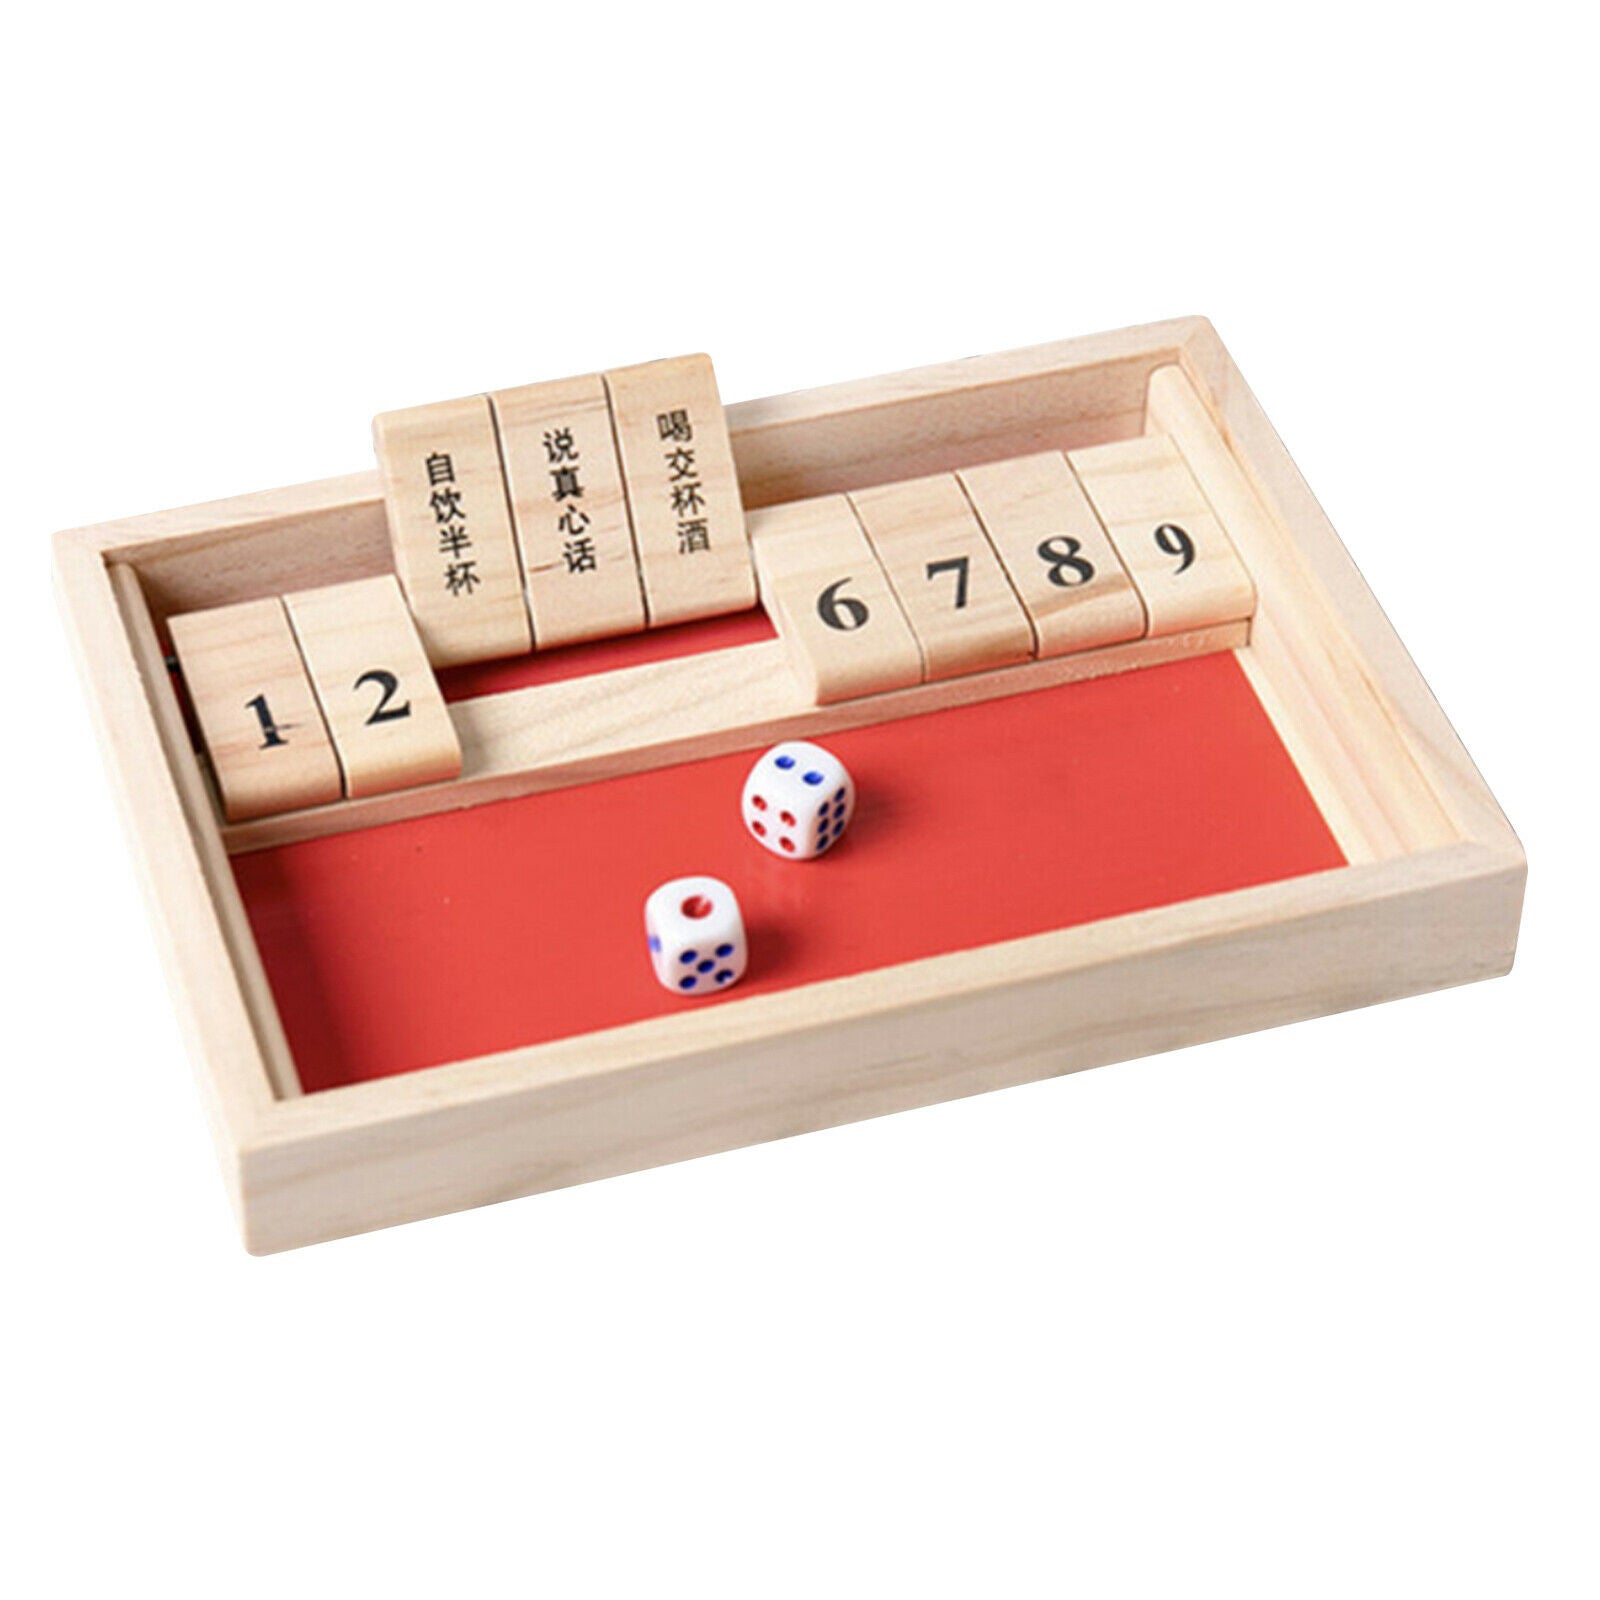 Shut The Box, Single Player 9 Numbers & 2 Dice Wood Table Board Game for Family